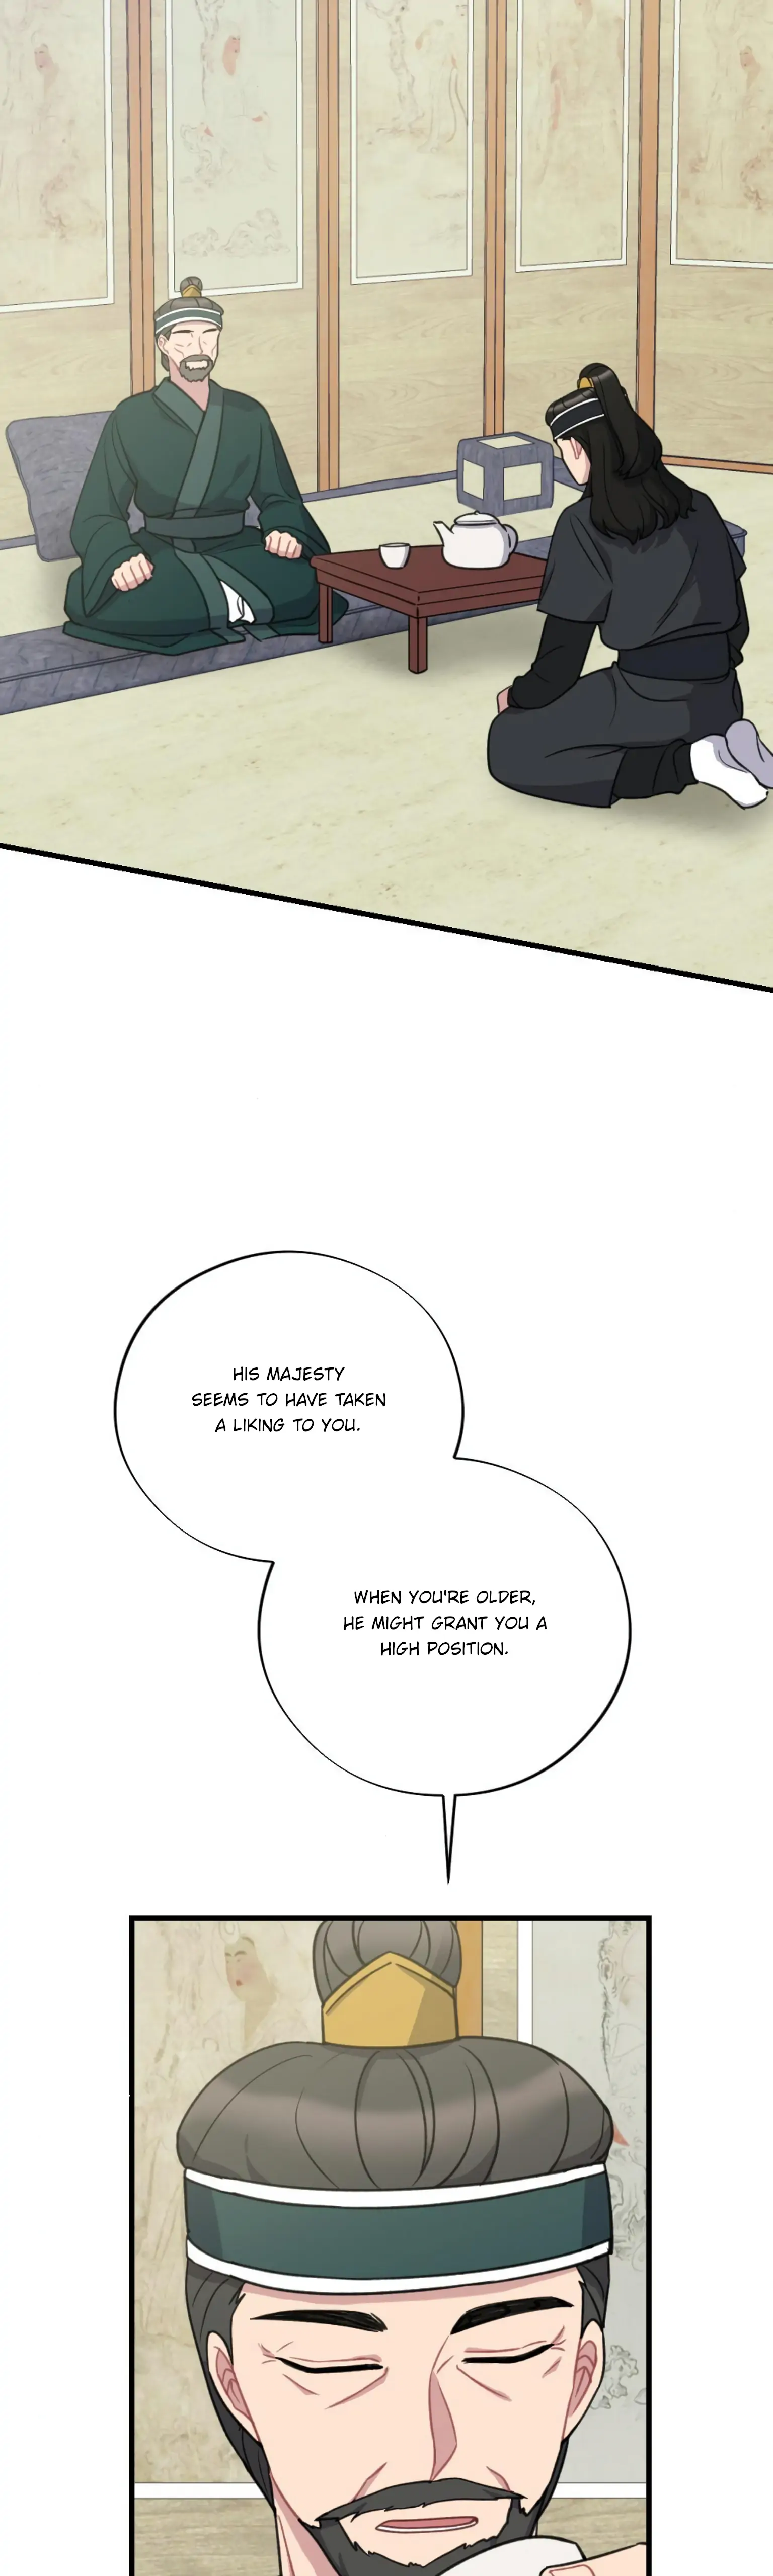 Dream Of A Sweet Rain - Page 2